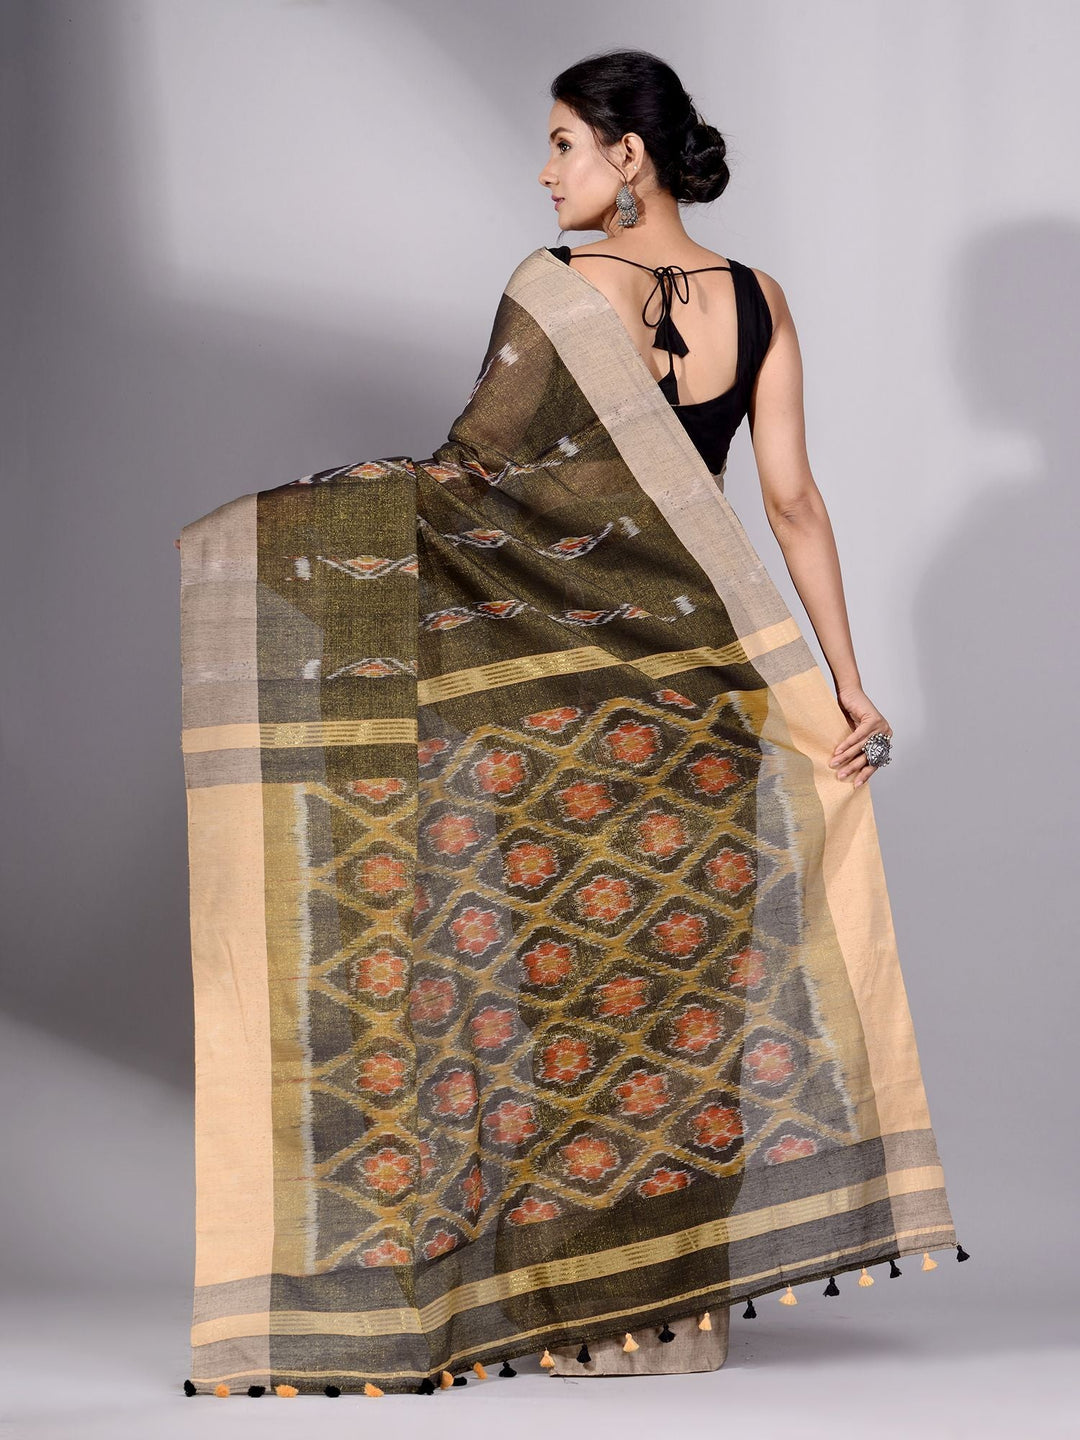 CHARUKRITI Juniper Green Tissue Handwoven Saree with Cream Border Without Blouse